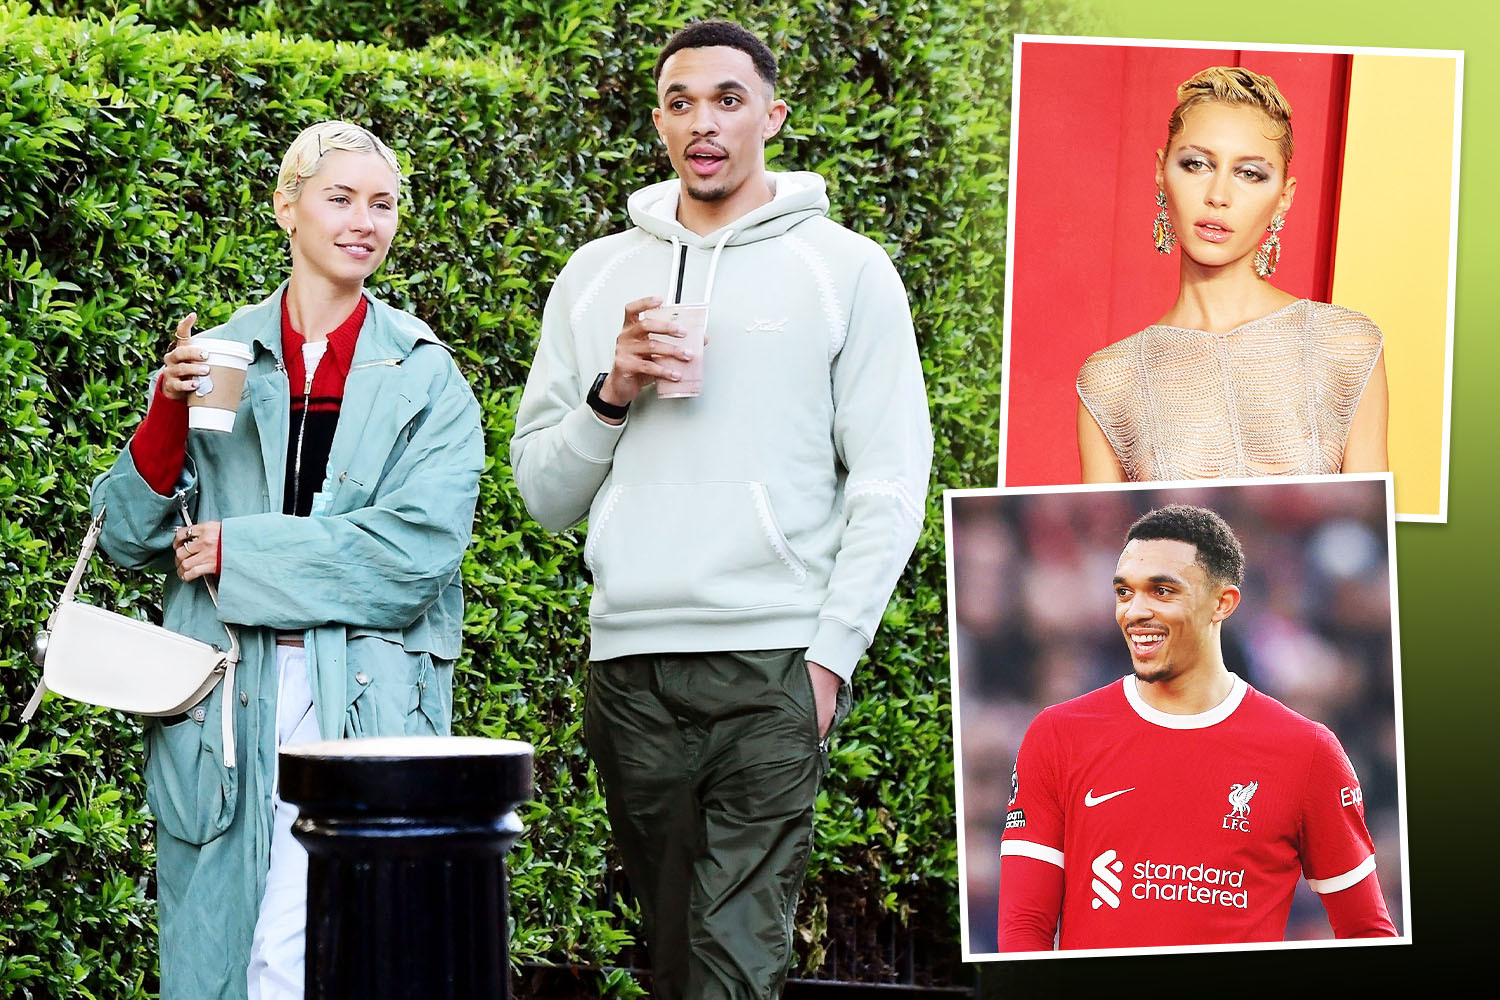 Inside Trent Alexander-Arnold & Iris Law's romance after texting for weeks